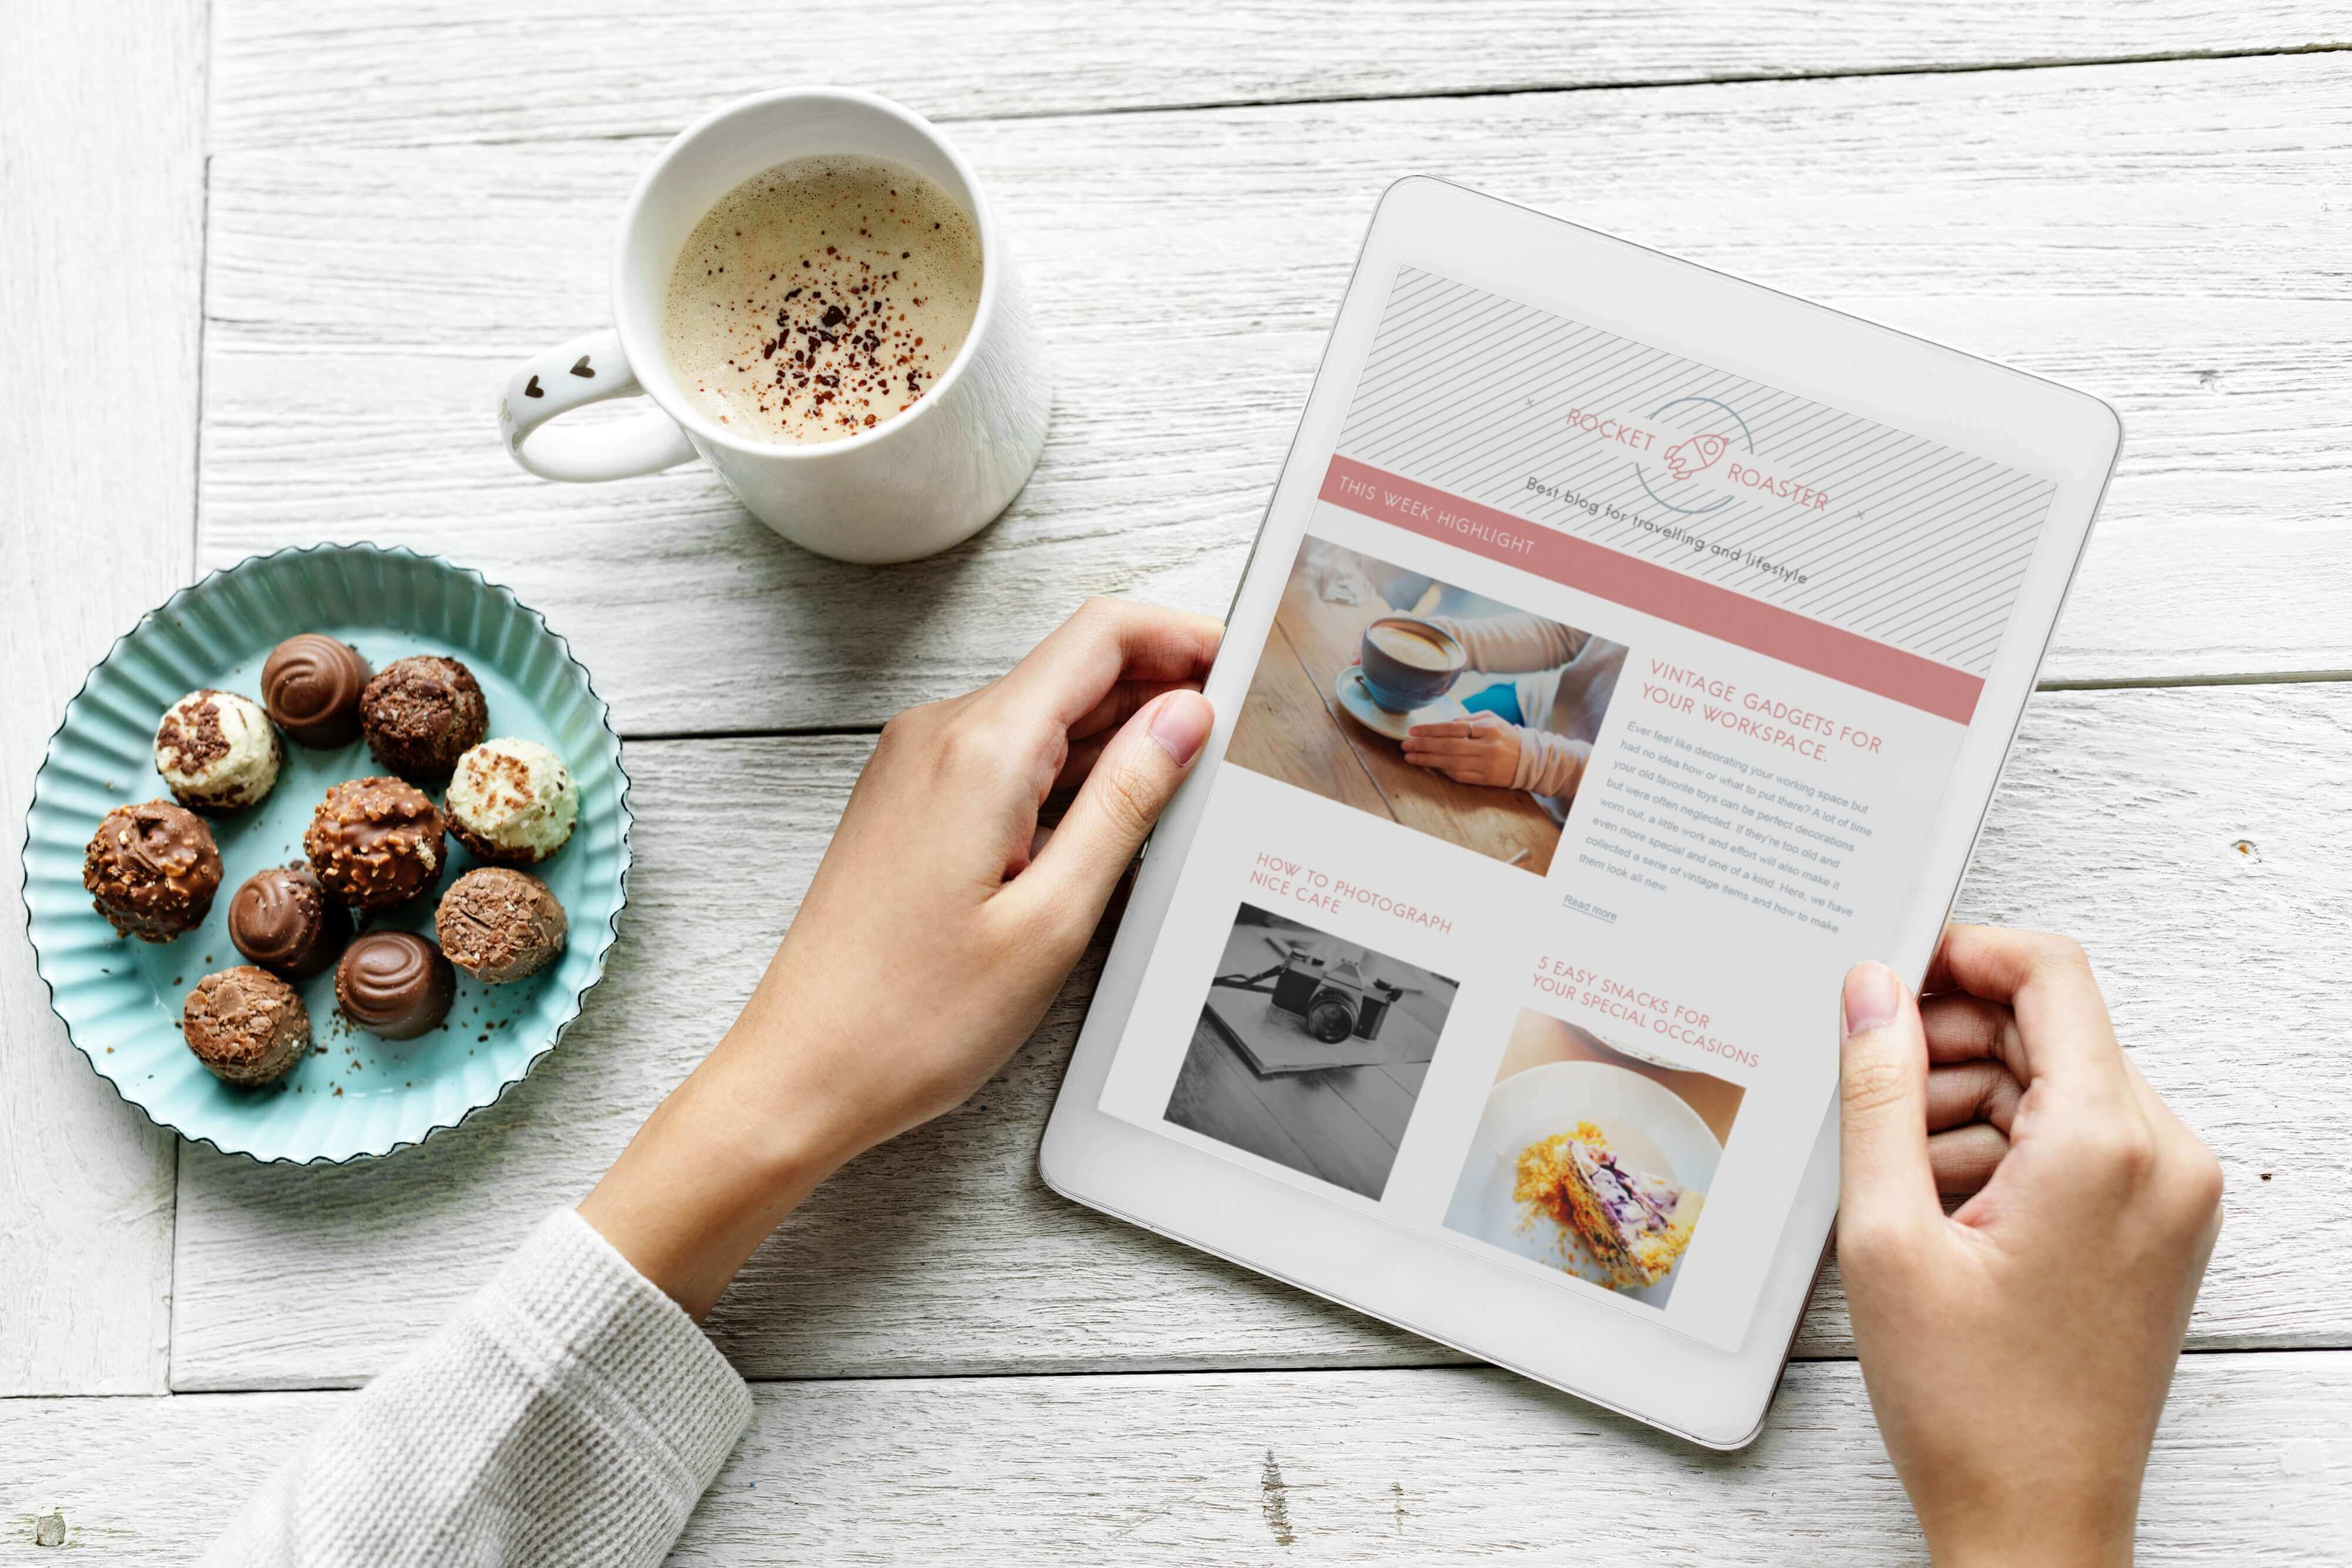 A white table with a cup of coffee and a plate of sweets placed over it. A pair of female hands are carrying a tablet showing some blog posts.